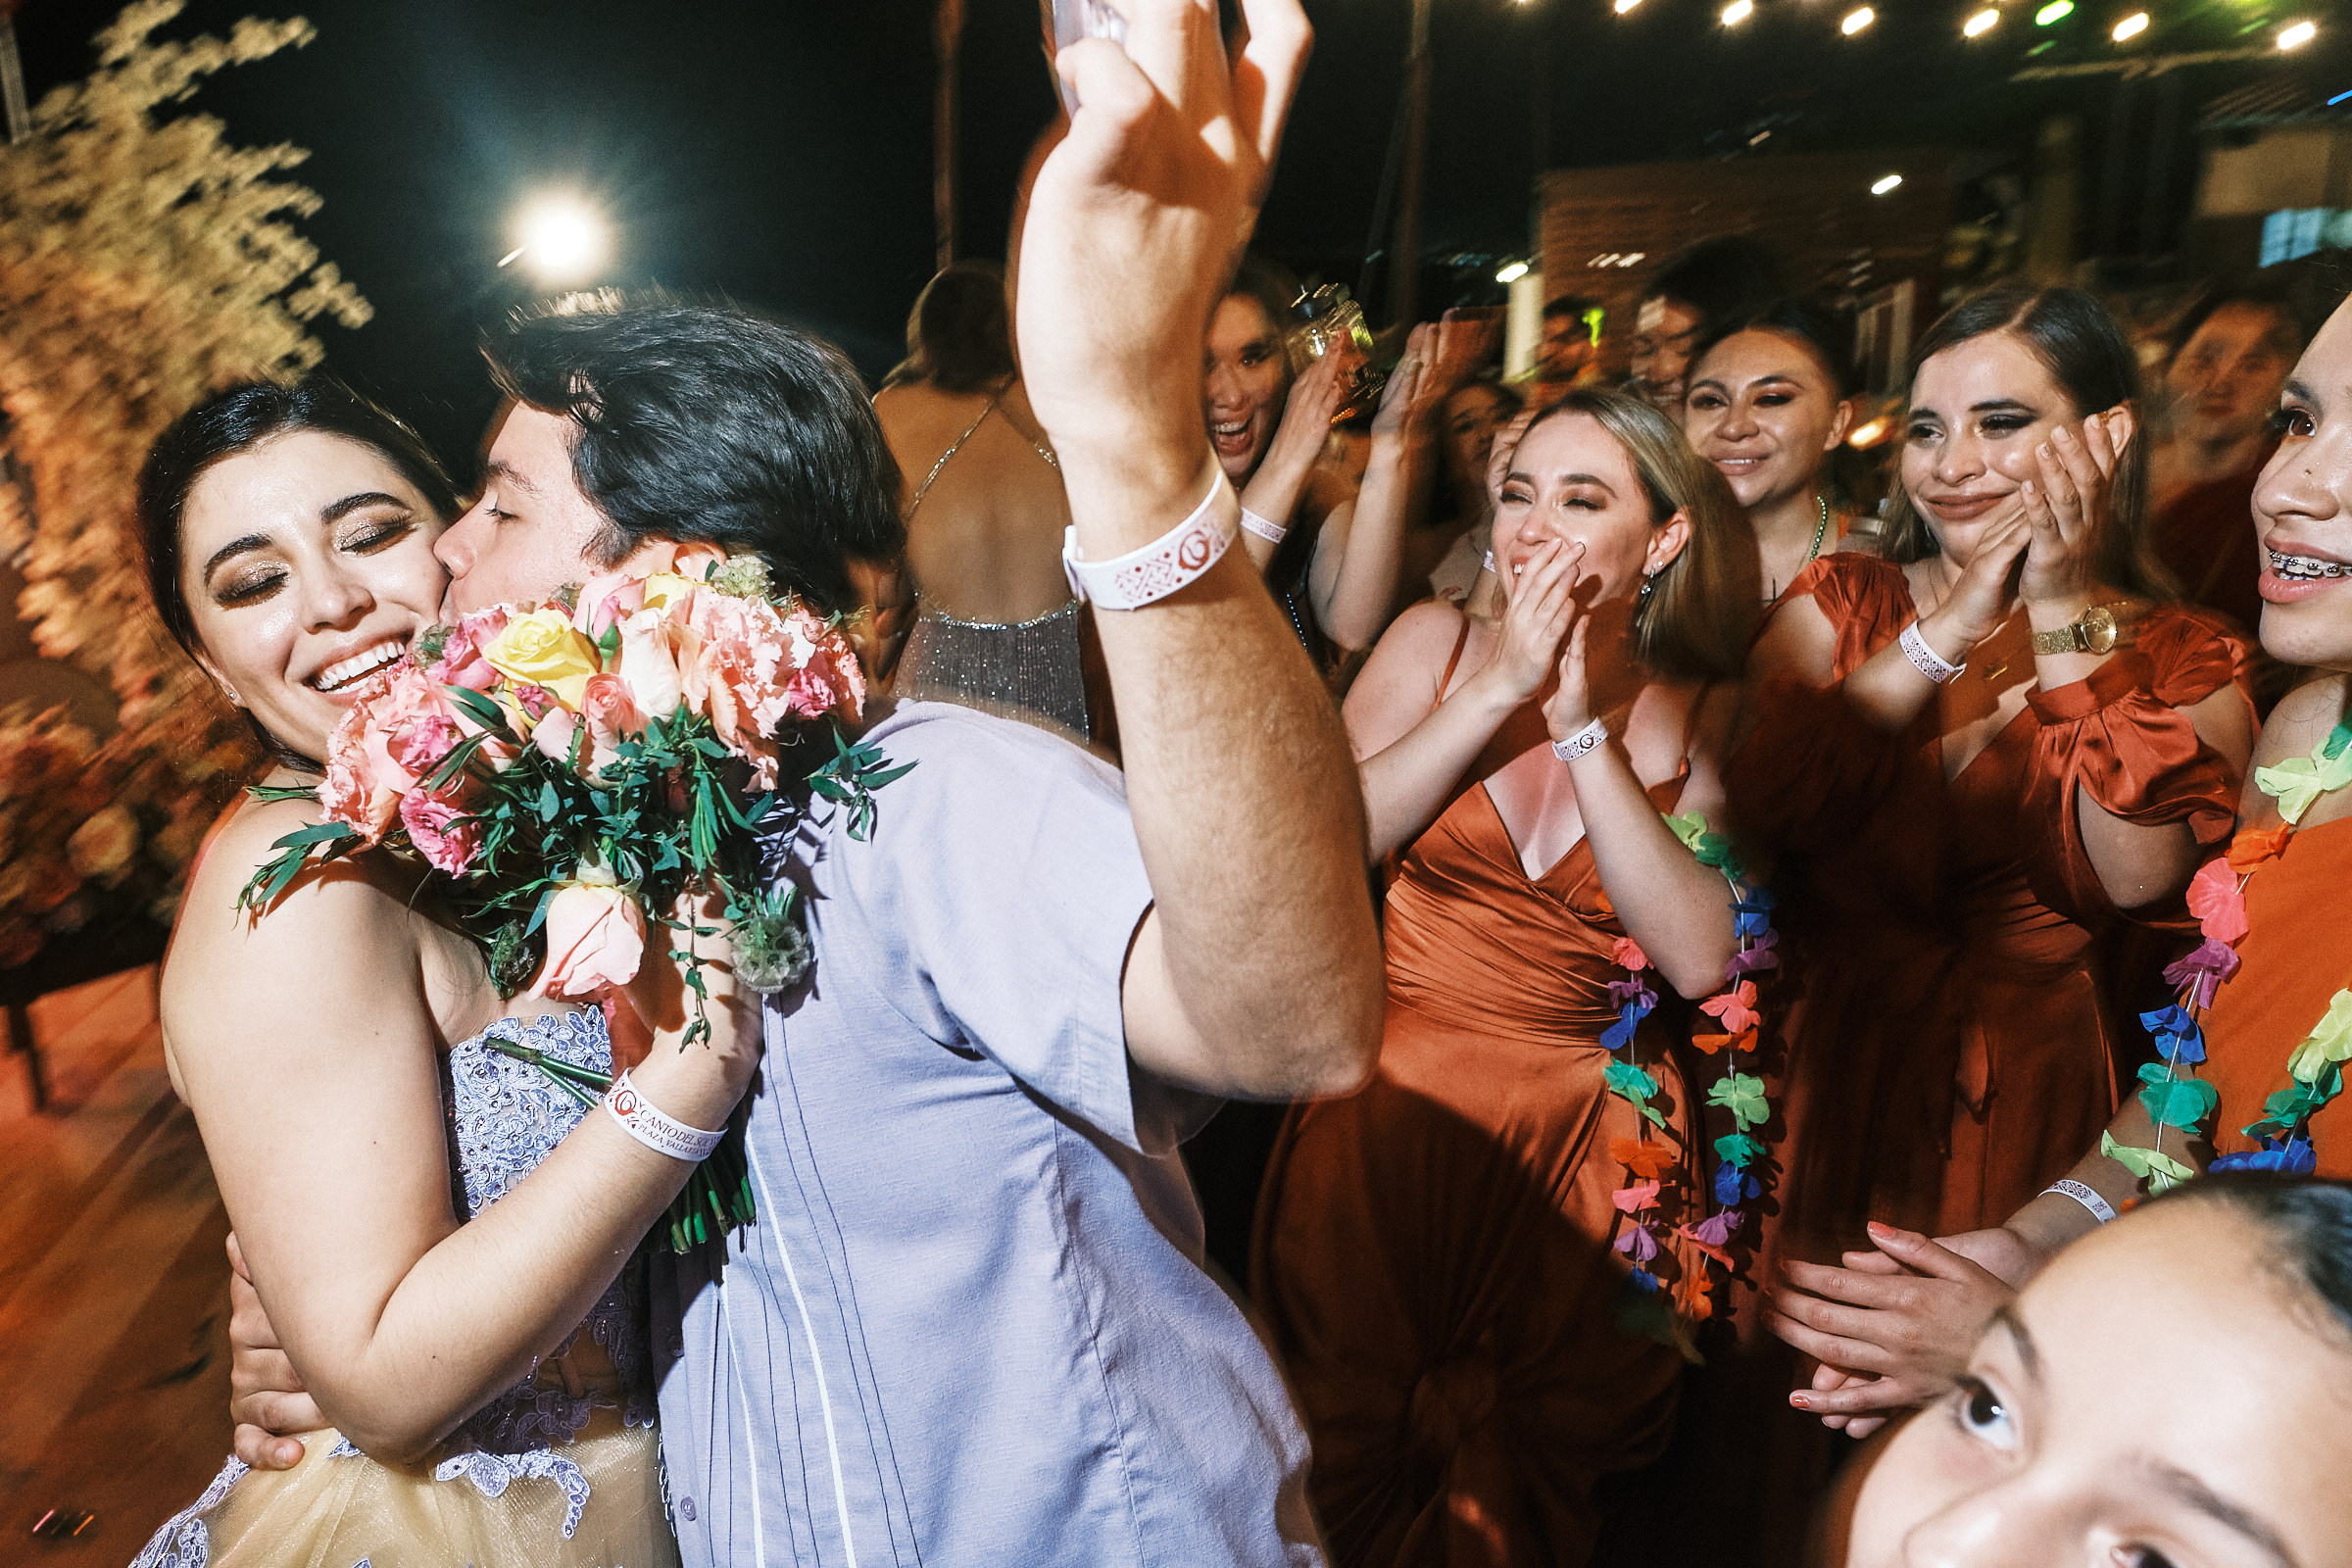 Sister Of The Bride Being Kissed On The Cheek While Others Watch